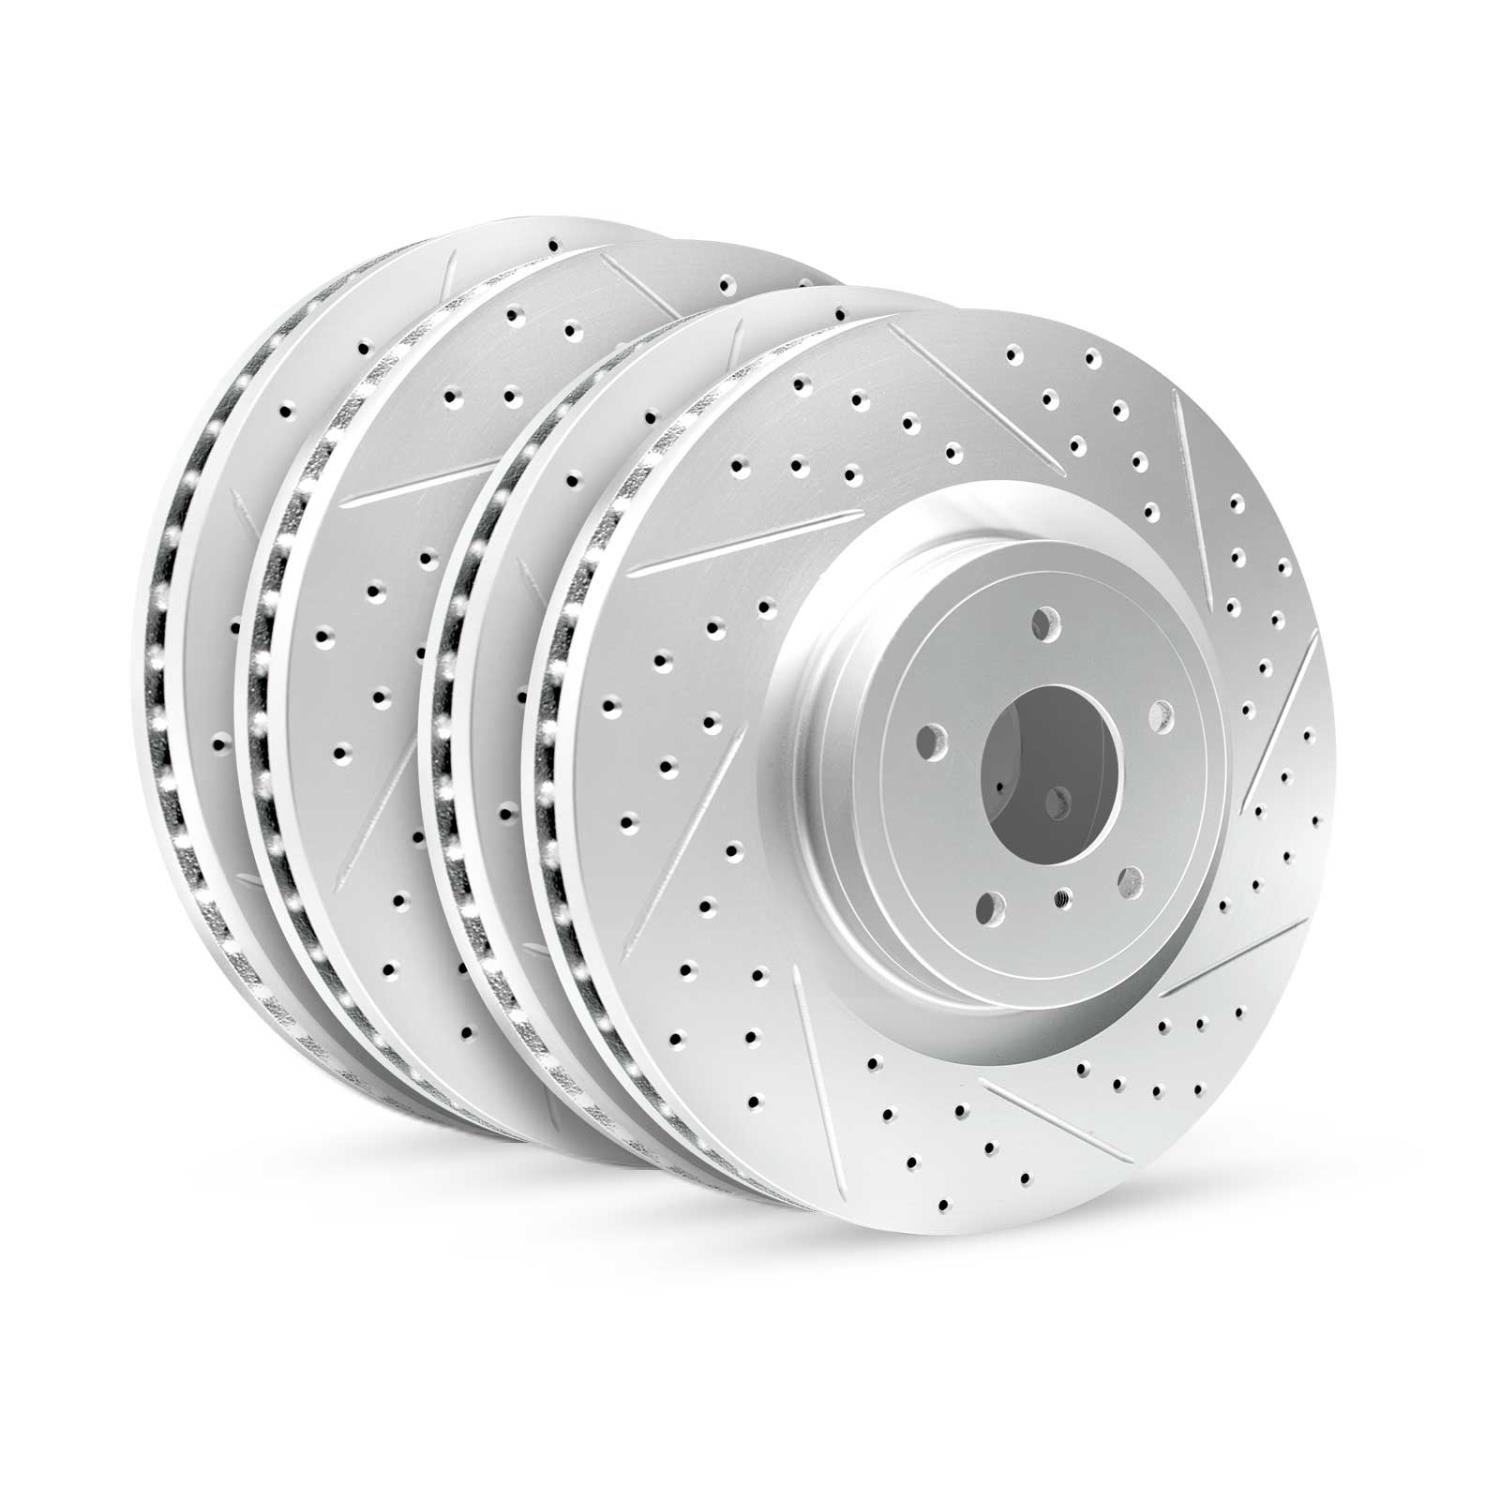 GEO-Carbon Drilled/Slotted Rotors, 2015-2020 Acura/Honda, Position: Front/Rear